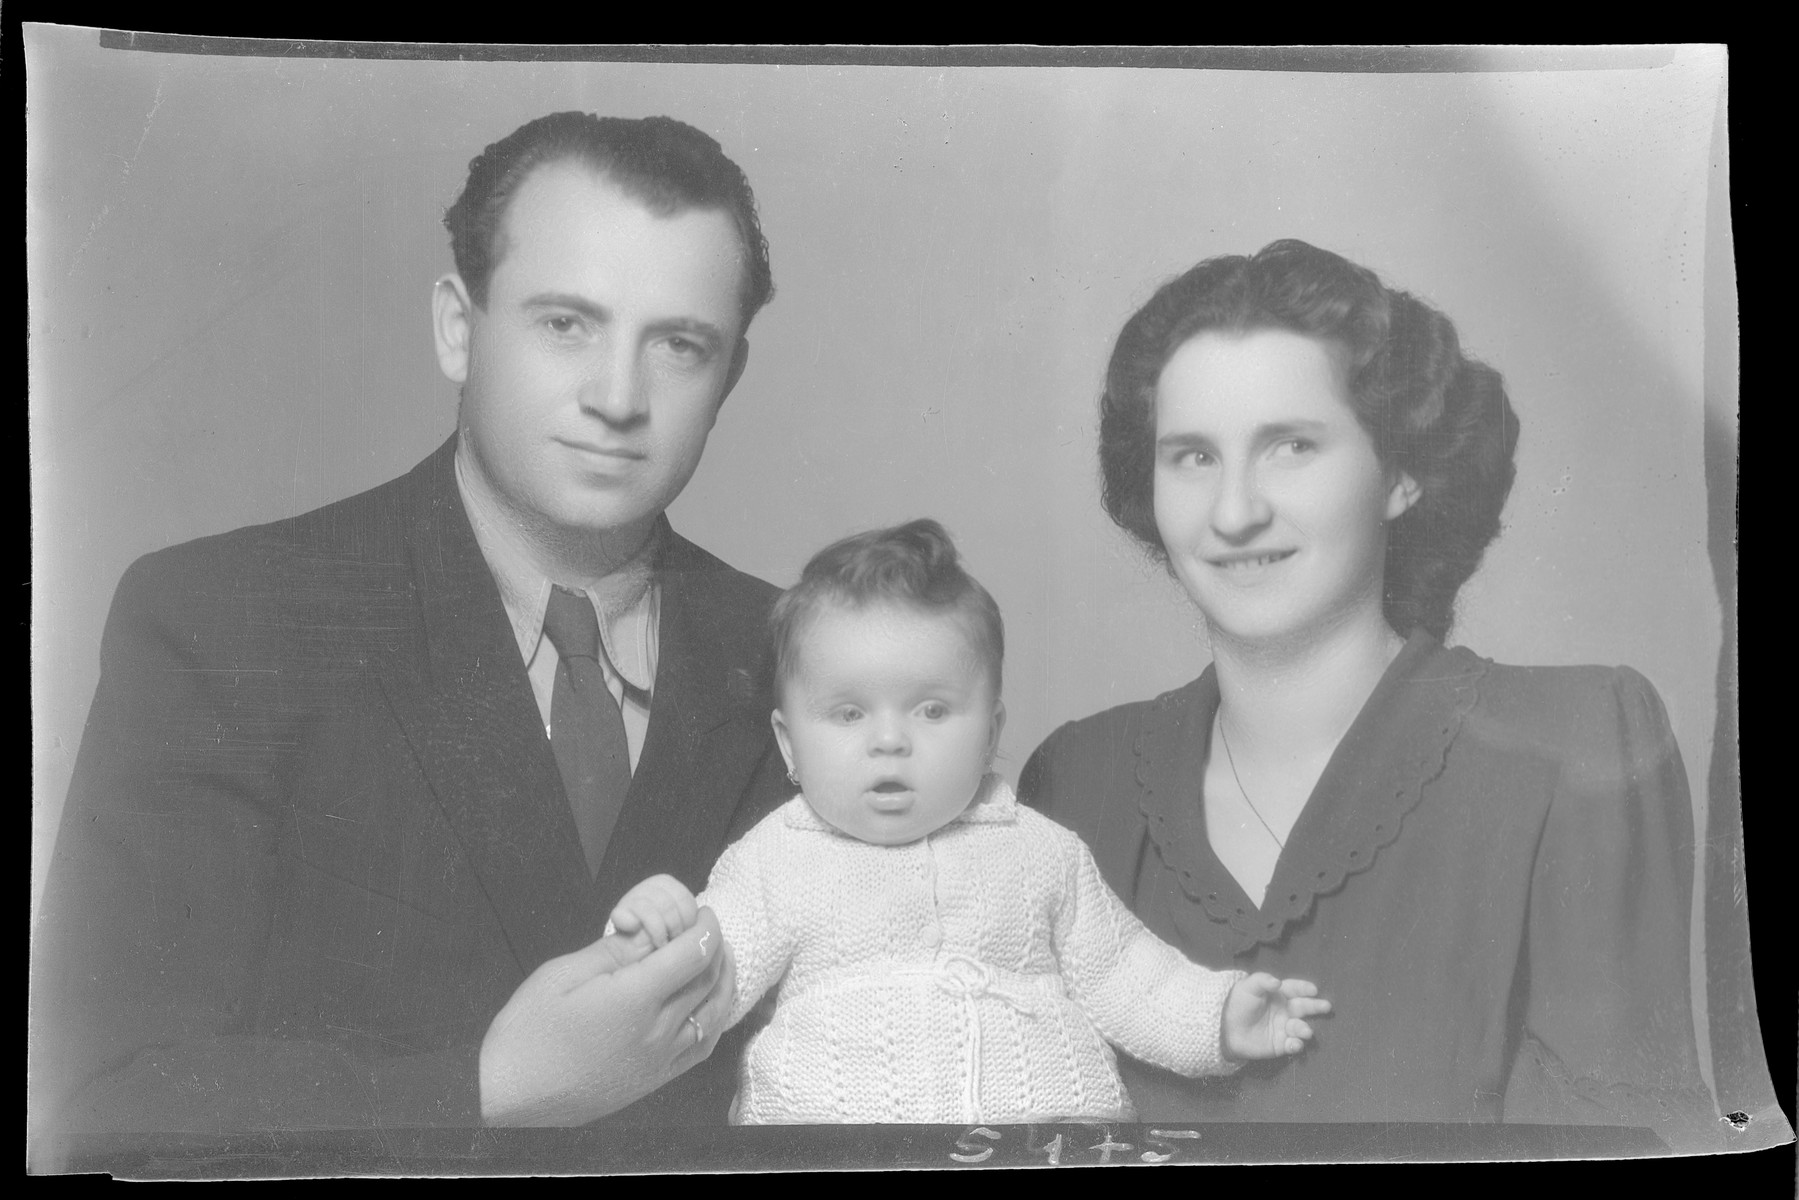 Studio portrait of Mihaly Goldstein, his wife and child.